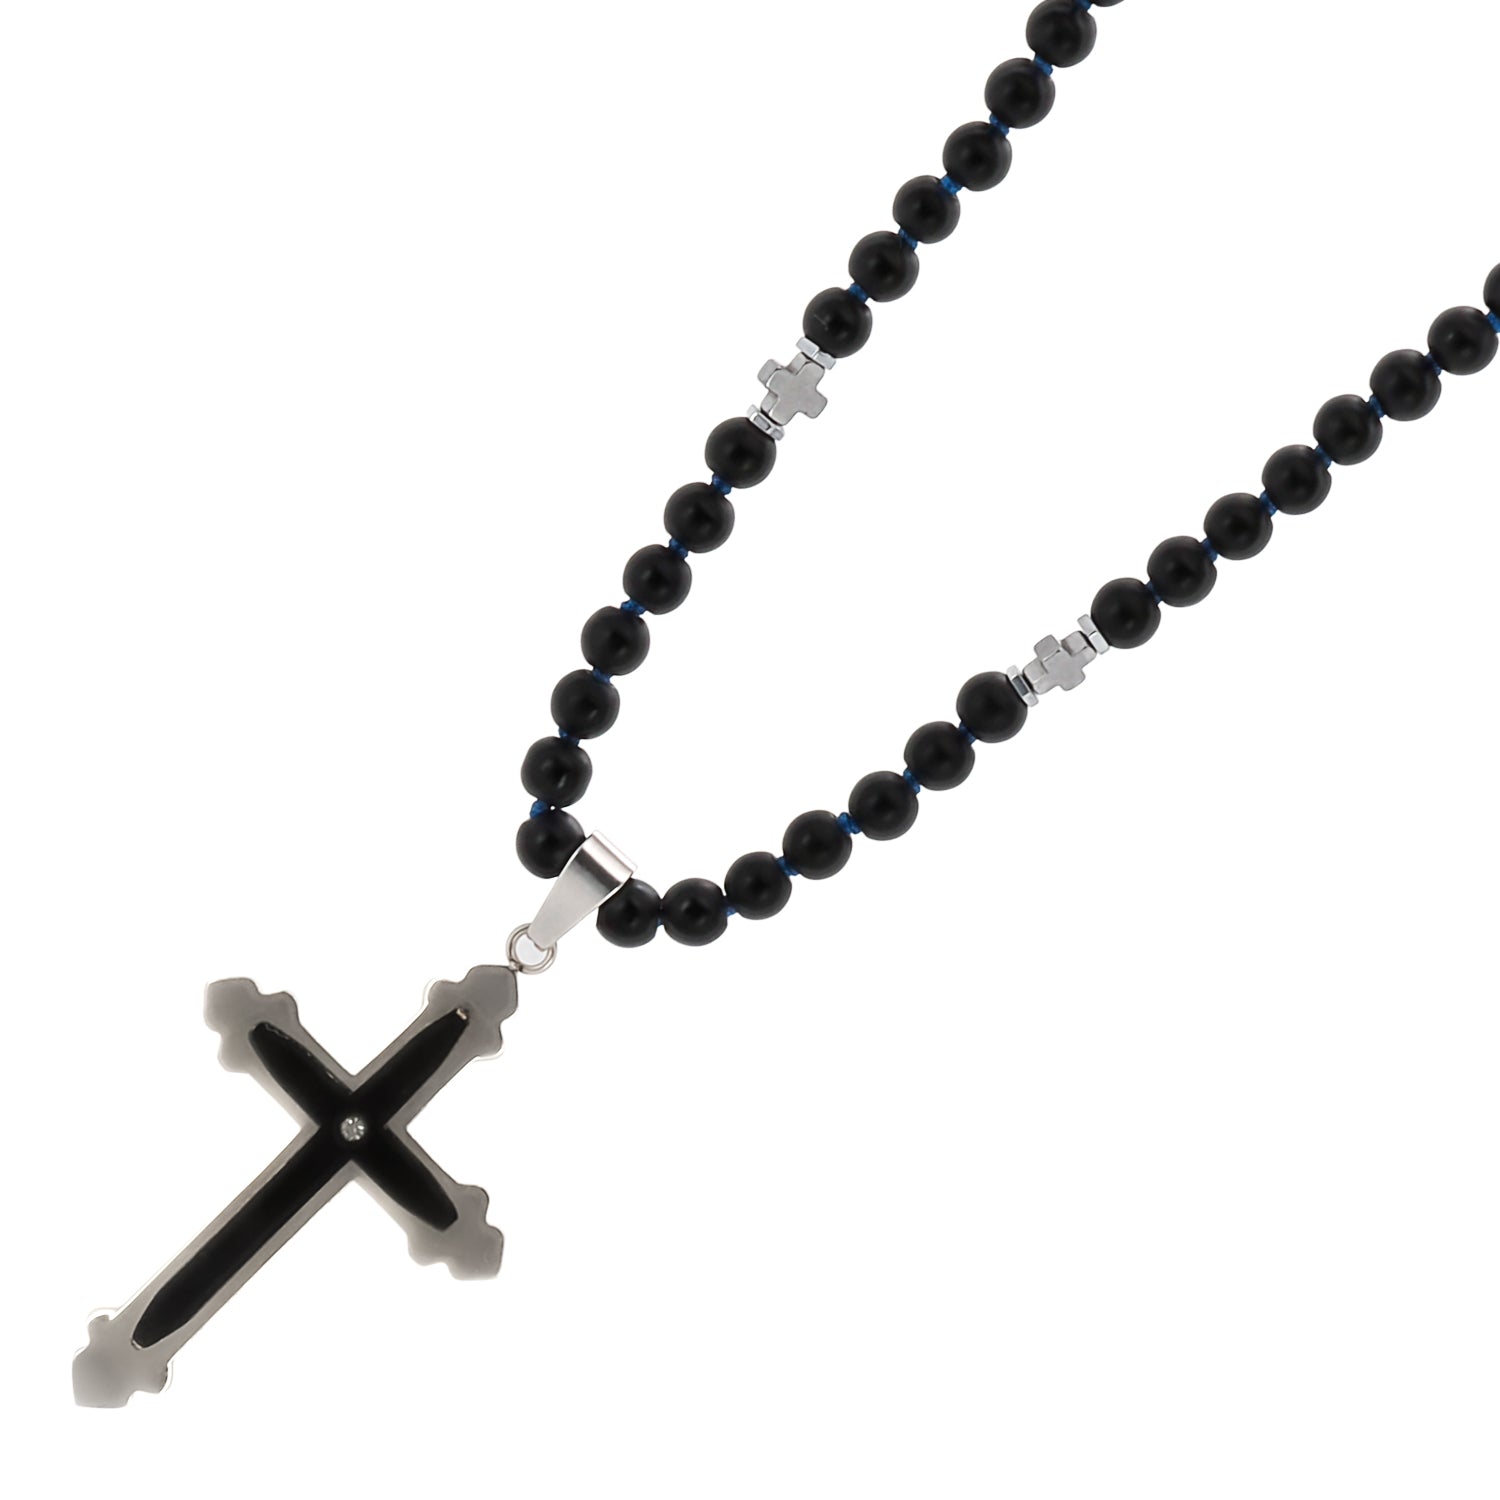 Black Onyx Cross Necklace with Hematite Spacers